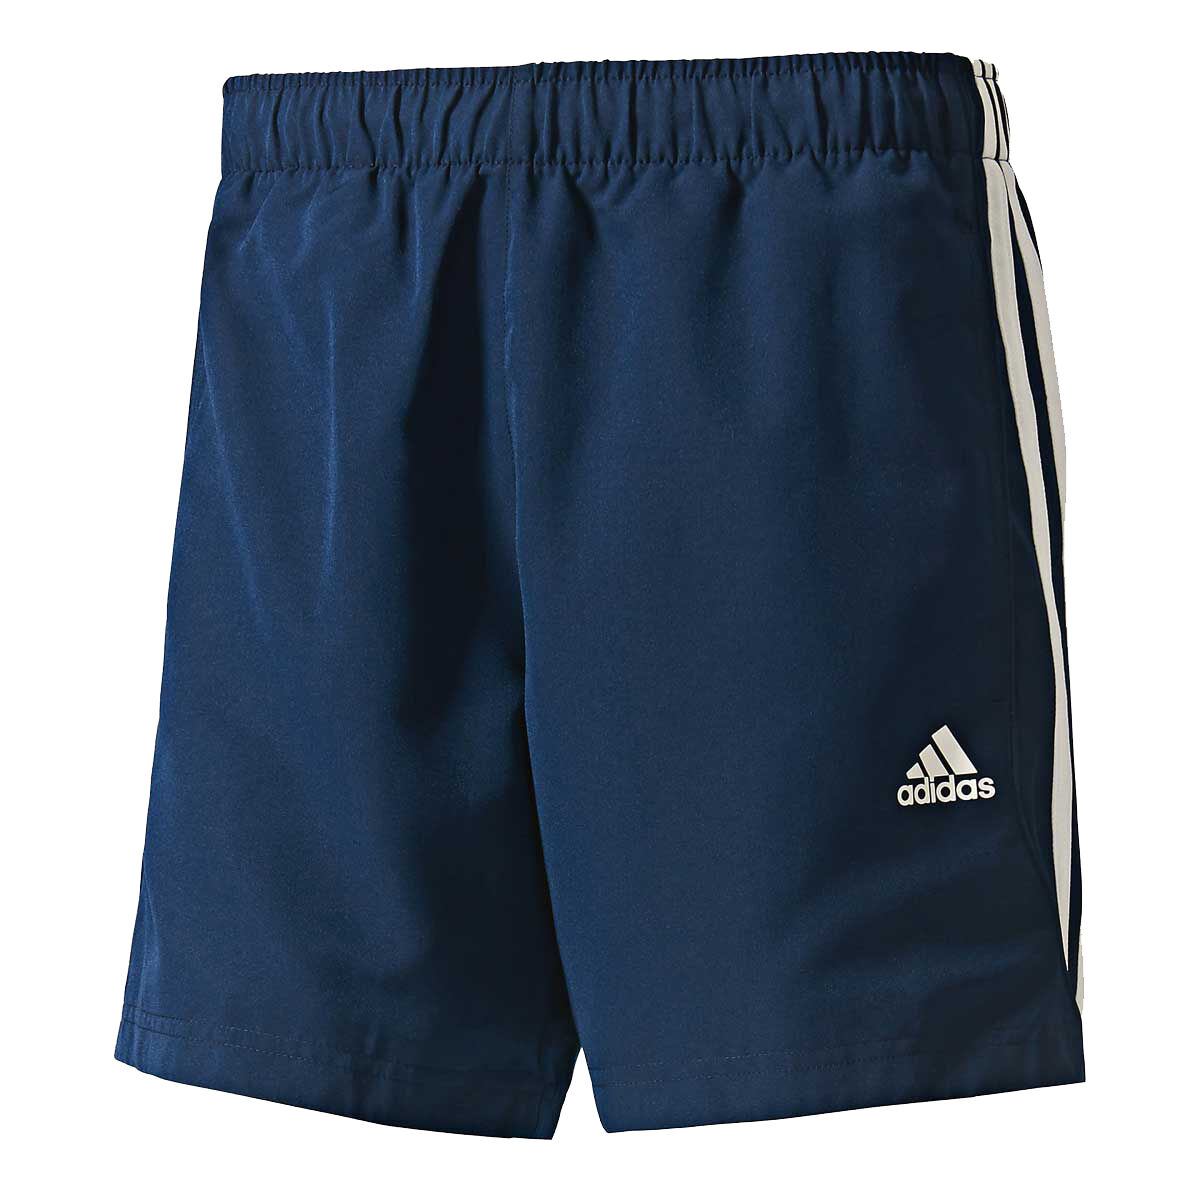 adidas shorts with liner